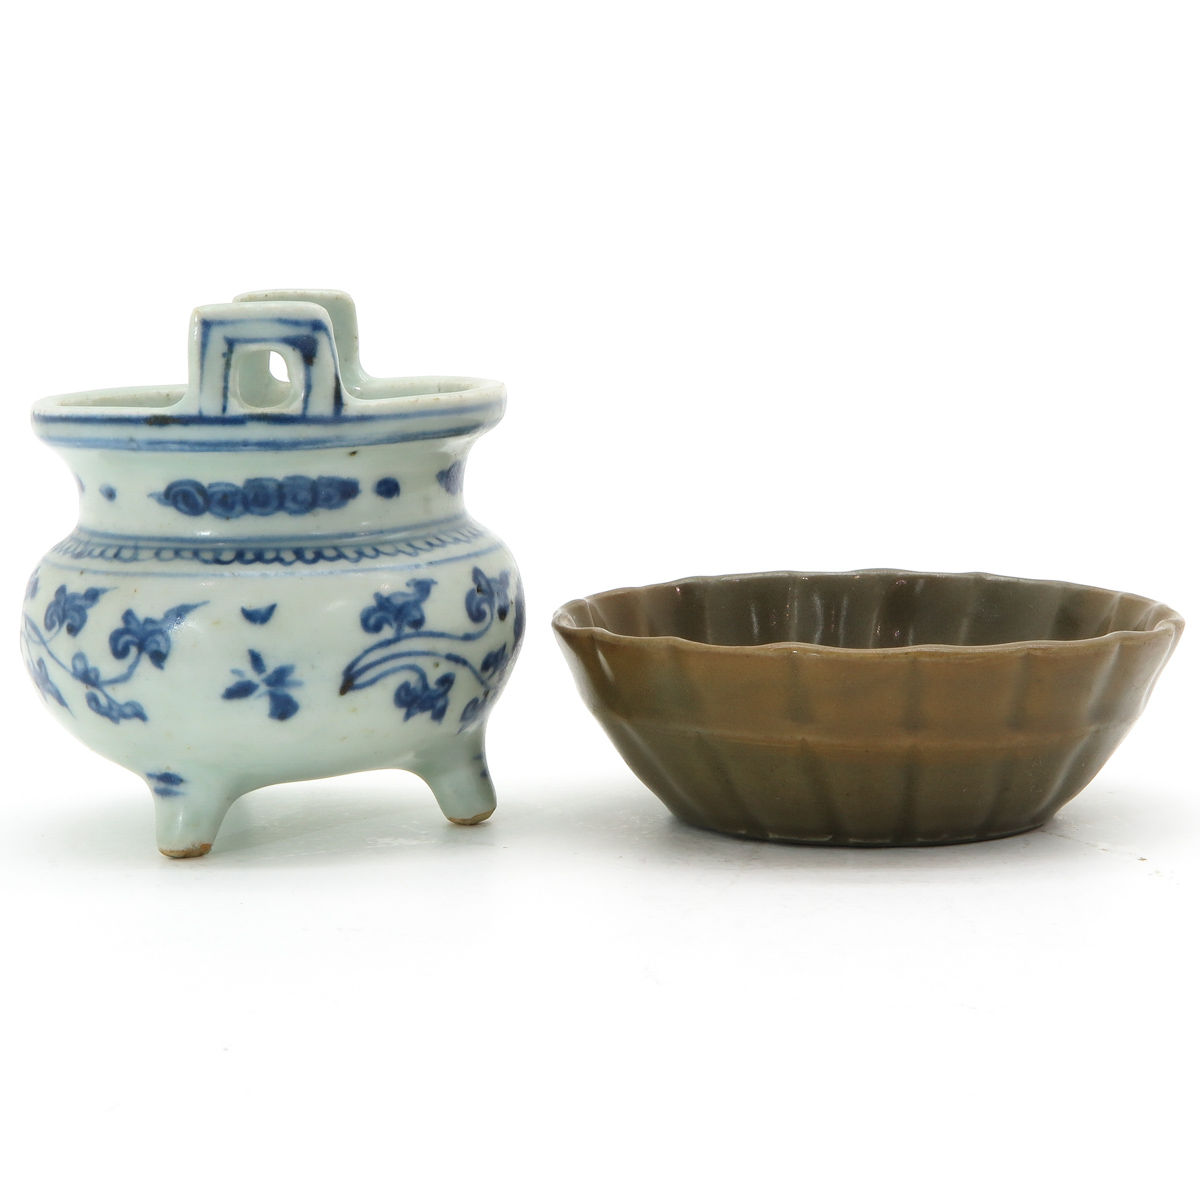 A Blue and White Decor Censer with Celadon Tray - Image 2 of 6